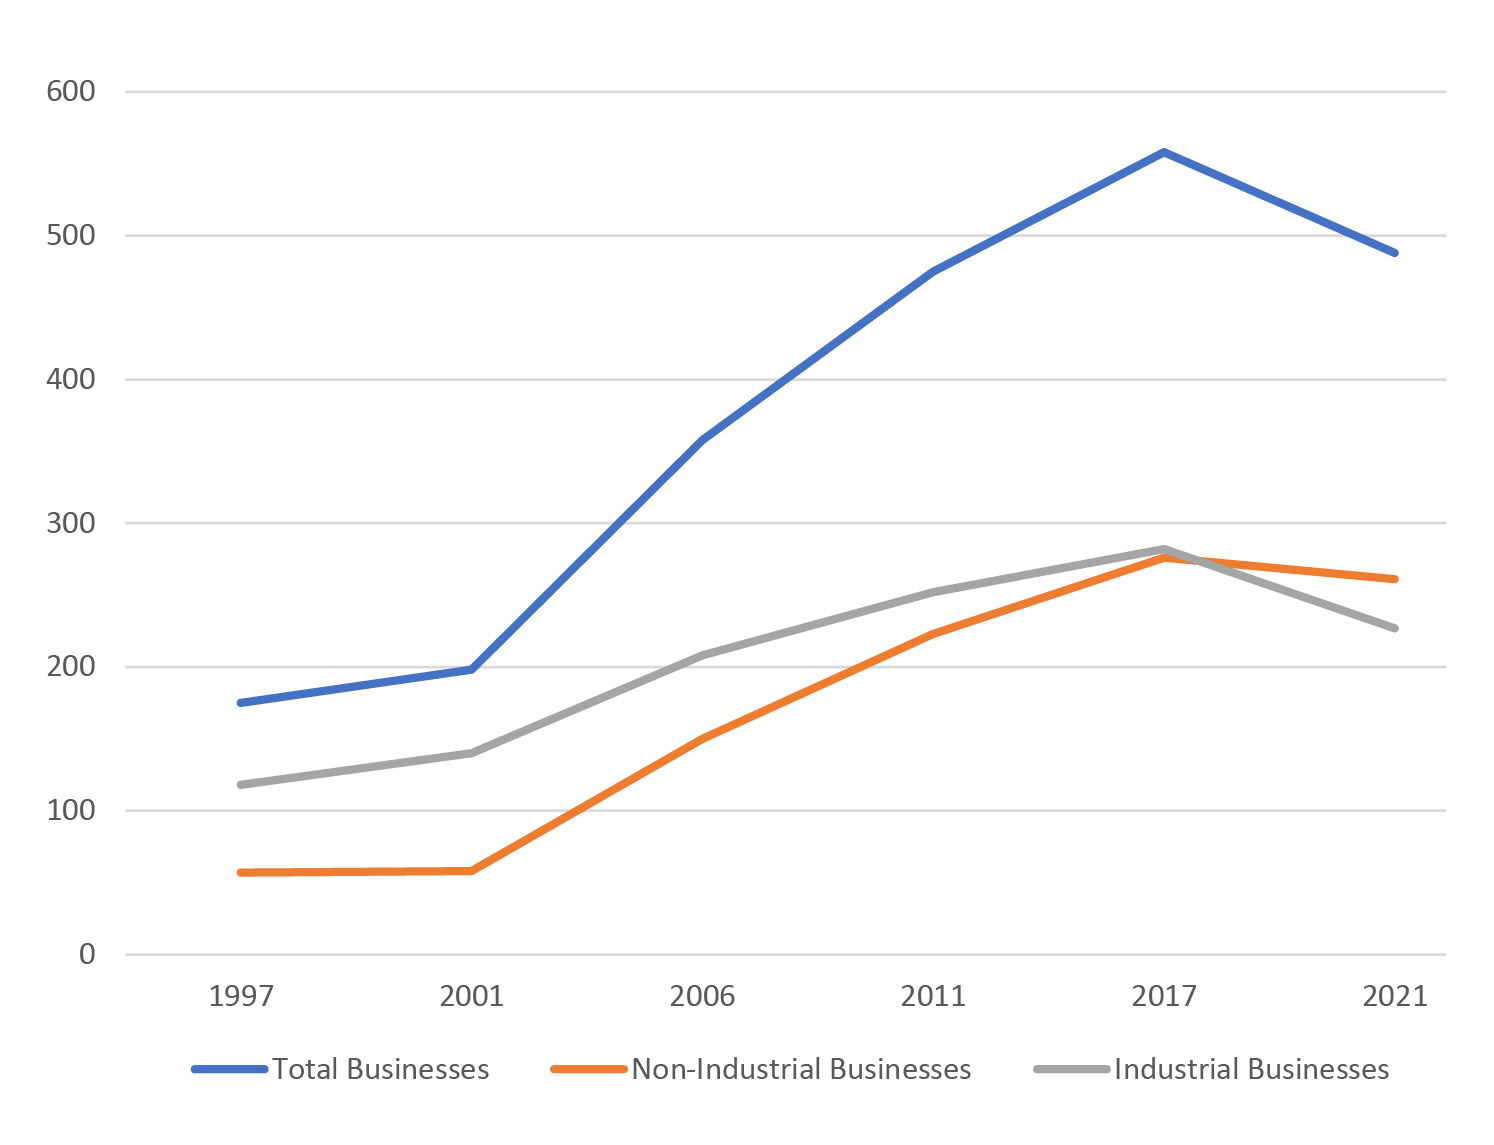 Figure 9 shows the number of licensed businesses between 1997 and 2021. The licensed businesses are seperated into two categories, each shown as one graph: non-industrial businesses shown in orange and industrial businesses shown in grey. The third graph shows the total business in blue. Apparently from 1997 till 2001 non of the graphs raises much. From 2001 on the total number of licensed businesses grew. While the industrial Business grew constantly from 1997 by issuing around 50 licenses per year, the number non-industrial licenses only starts growing from 2001 on. By 2017 both industrial business and non-industrial business count around 550 licences – the climax. Between 2017 and 2021 both graphs decrease, so that less than 500 licences can be counted in 2021.